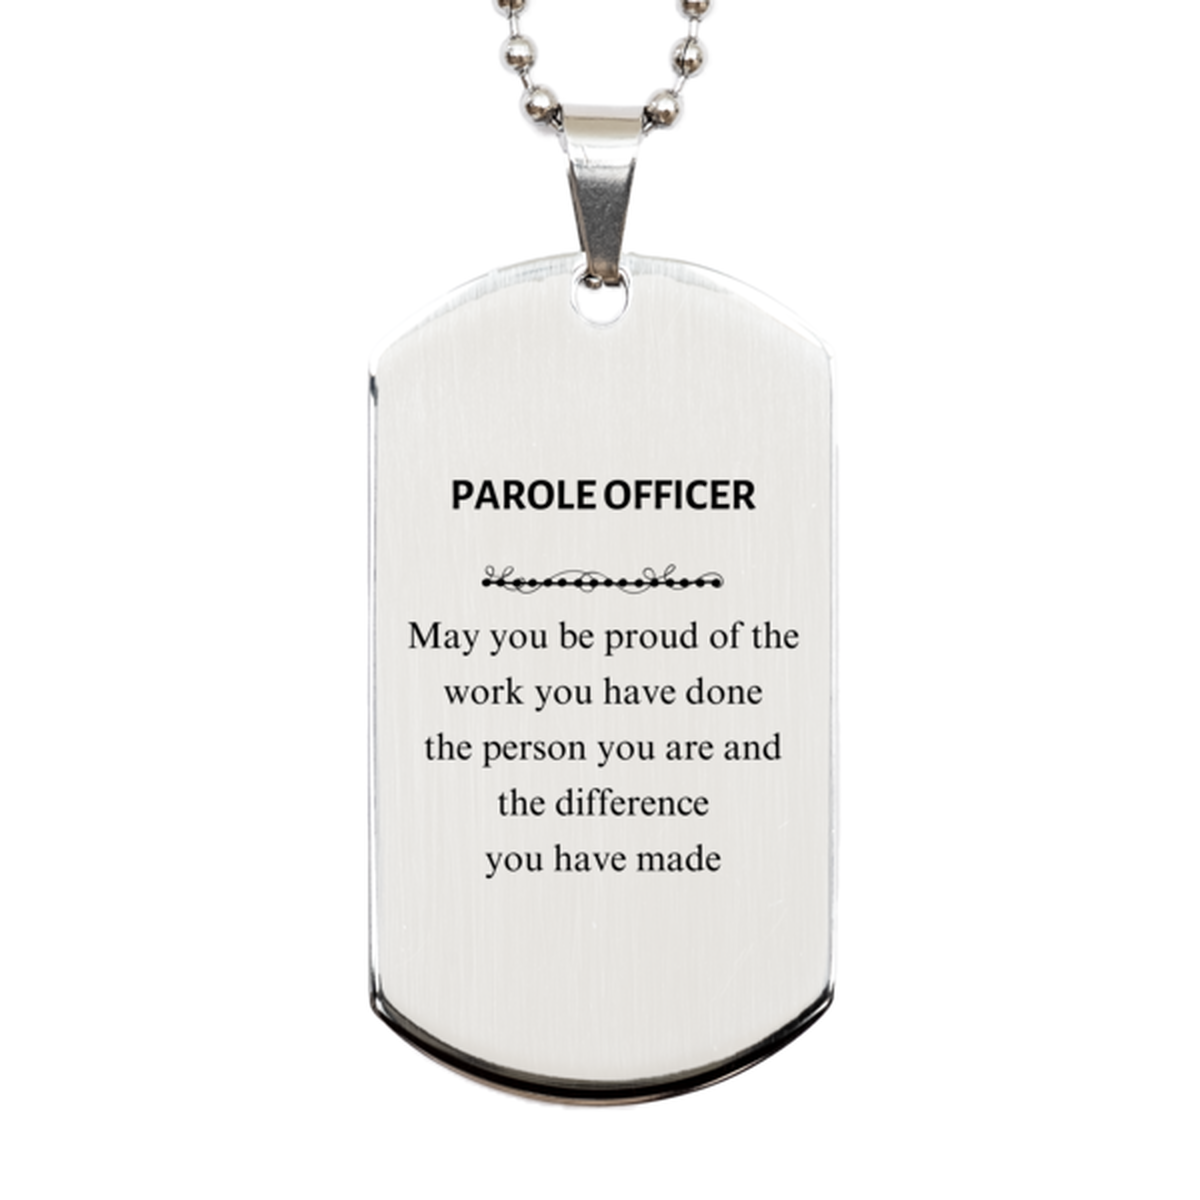 Parole Officer May you be proud of the work you have done, Retirement Parole Officer Silver Dog Tag for Colleague Appreciation Gifts Amazing for Parole Officer